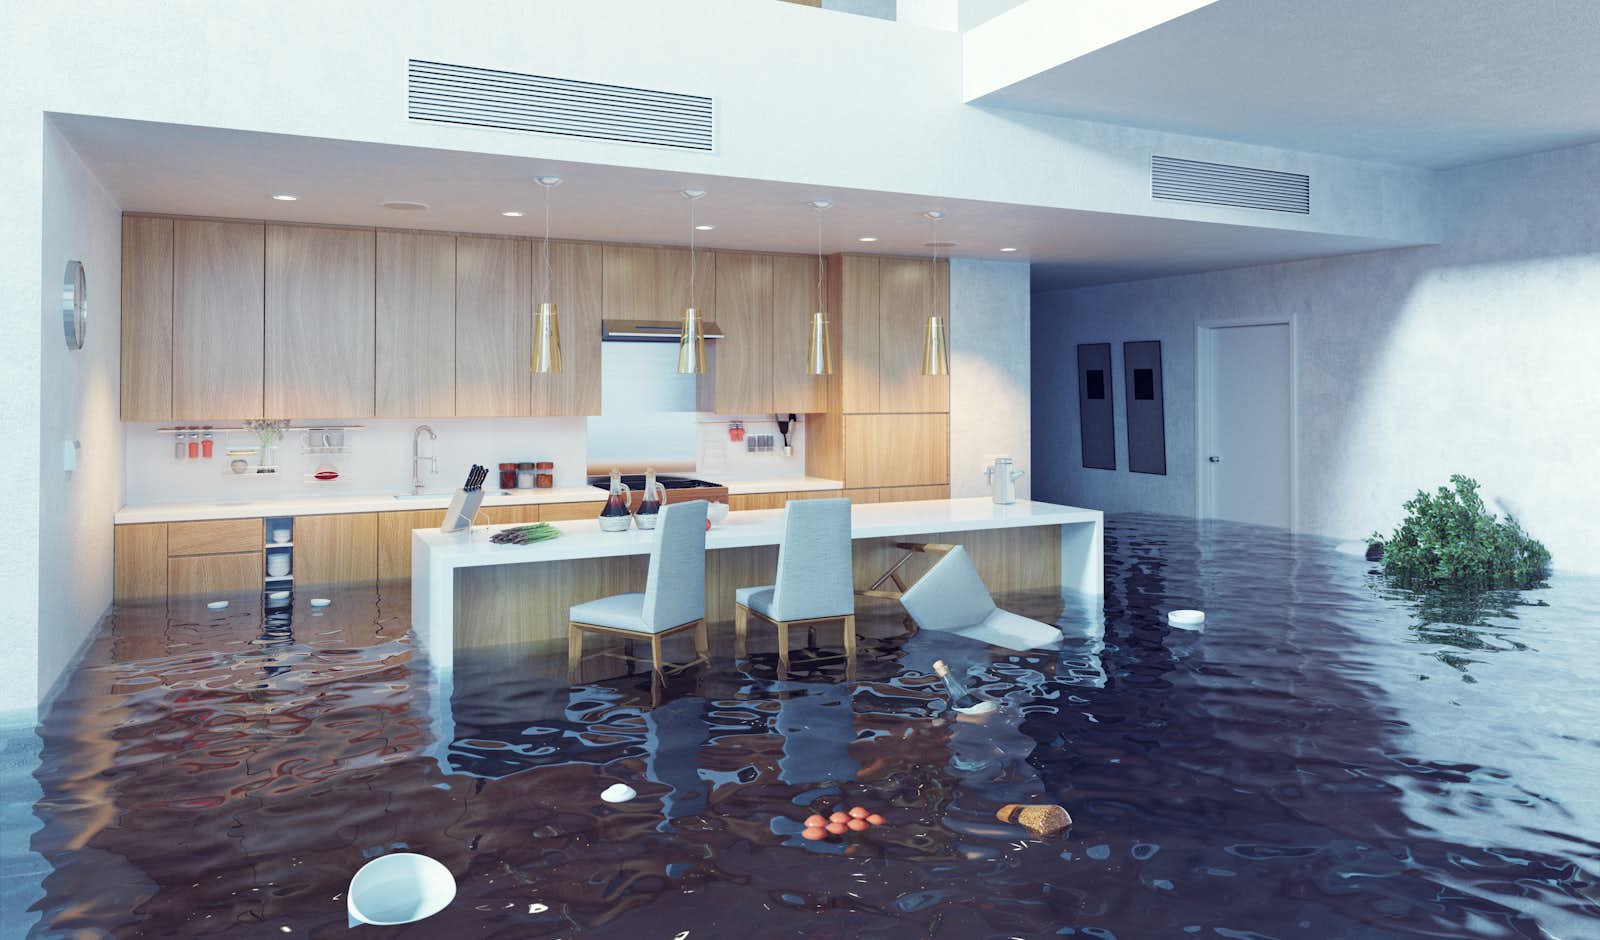 Flooding in the kitchen, home warranty